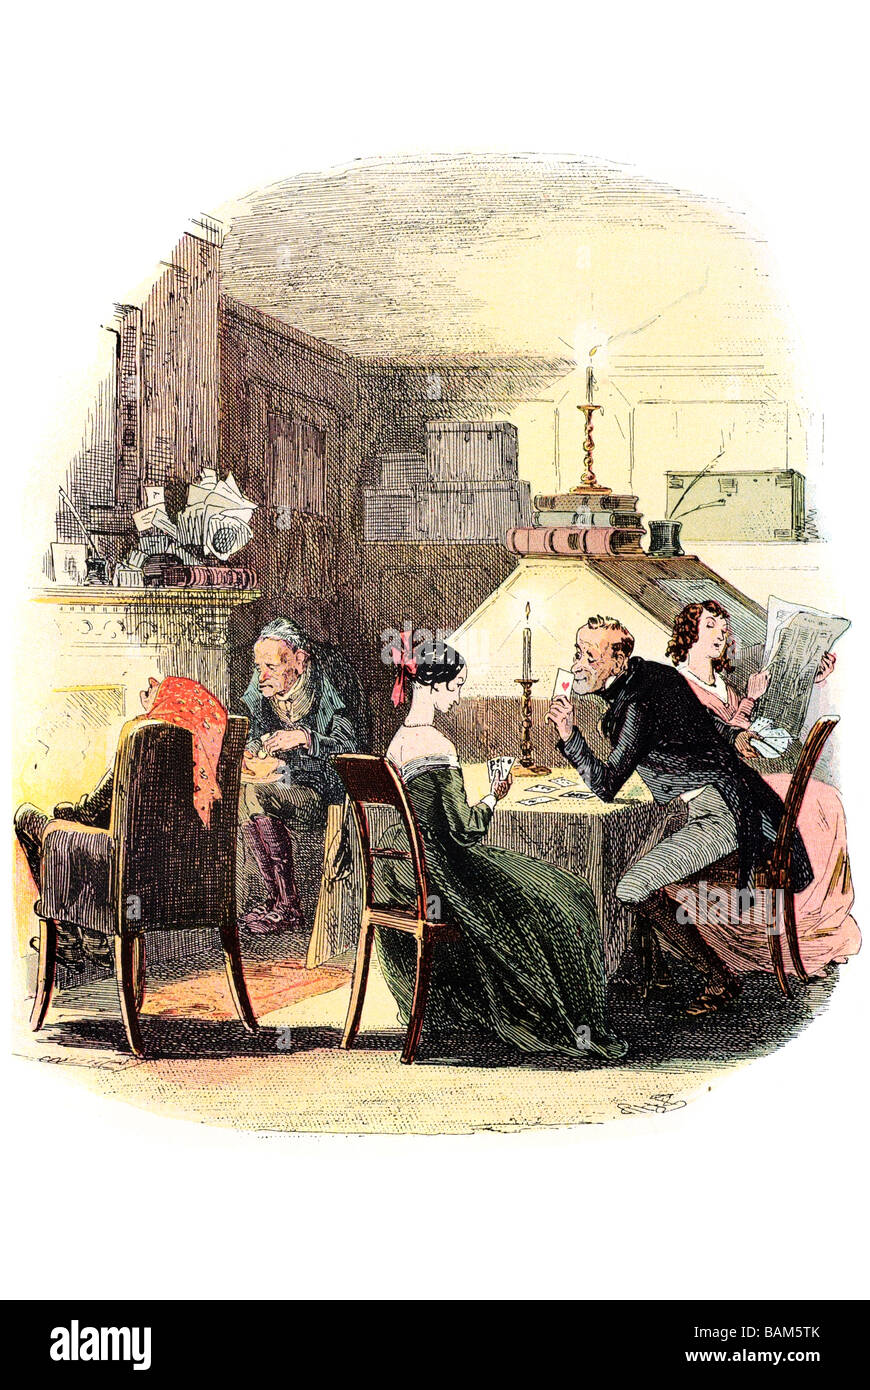 mr jonas chuzzlewt entertains his cousins The Life and Adventures of Martin Chuzzlewit charles dickens Stock Photo